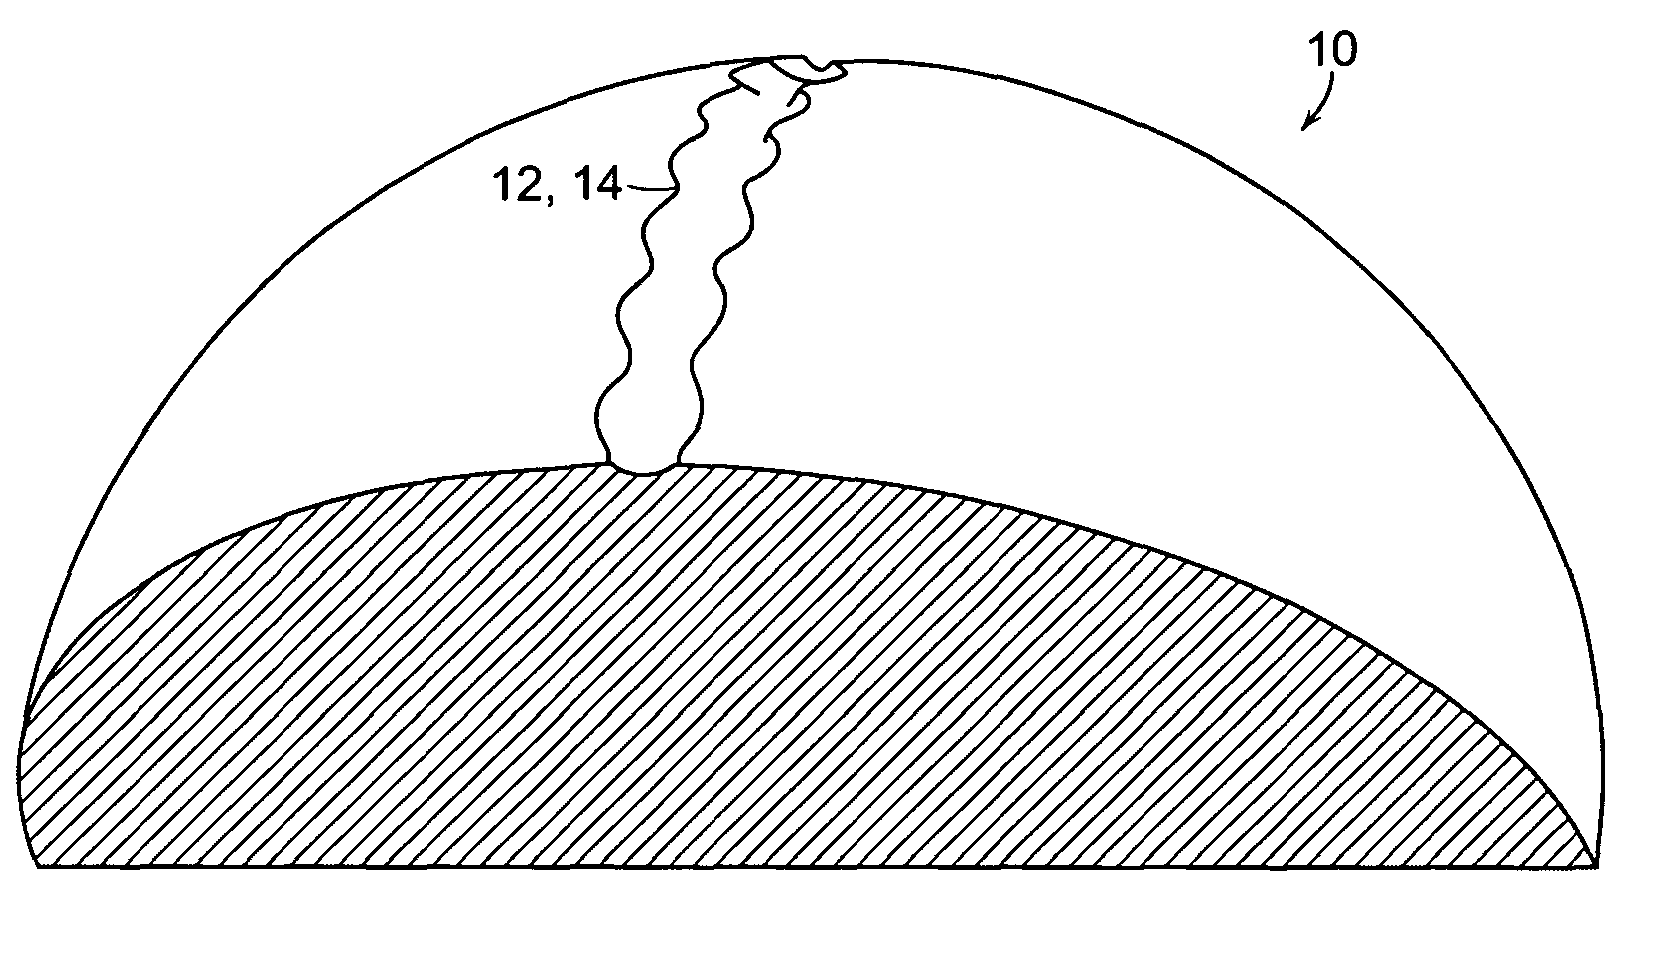 Golf ball surface patterns comprising variable width/depth multiple channels